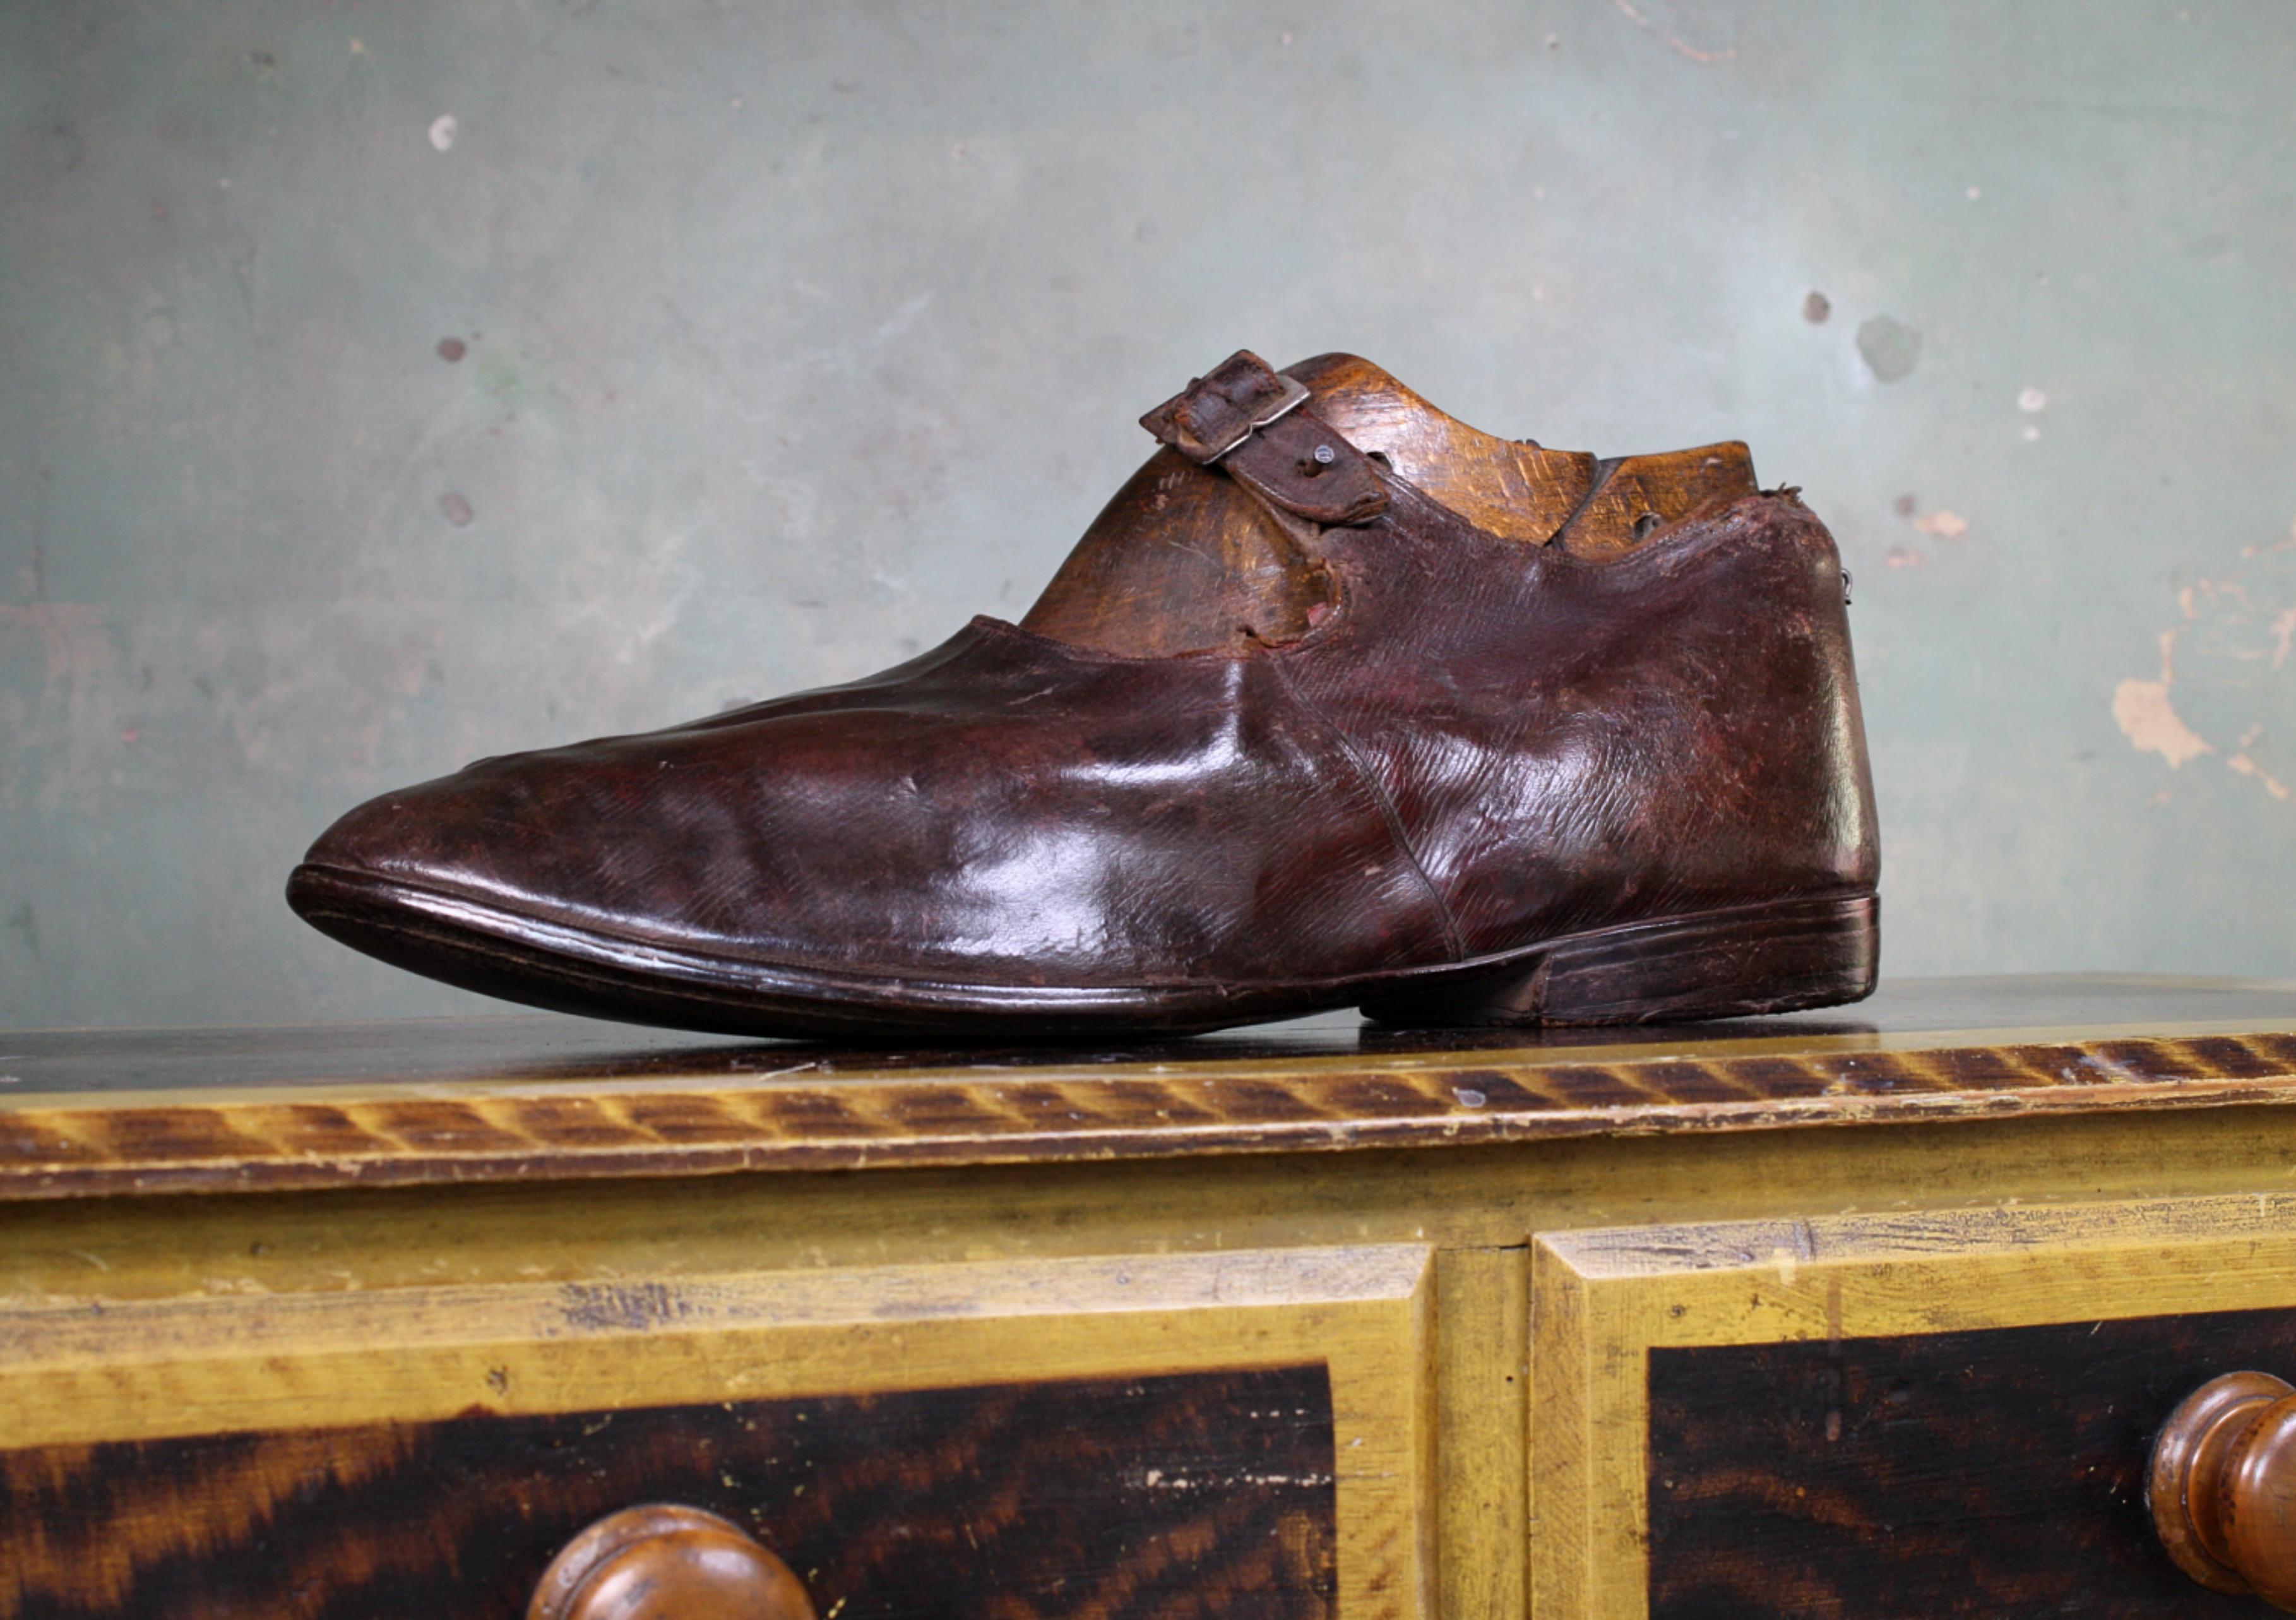 An odd decorative item, by repute the shoe of Russian Giant Feodor Machnow.

The shoe is of leather construction, maroon in color, with a brass buckle. Leather sole and heal, the shoe has been well worn due to the consistence wear especially on